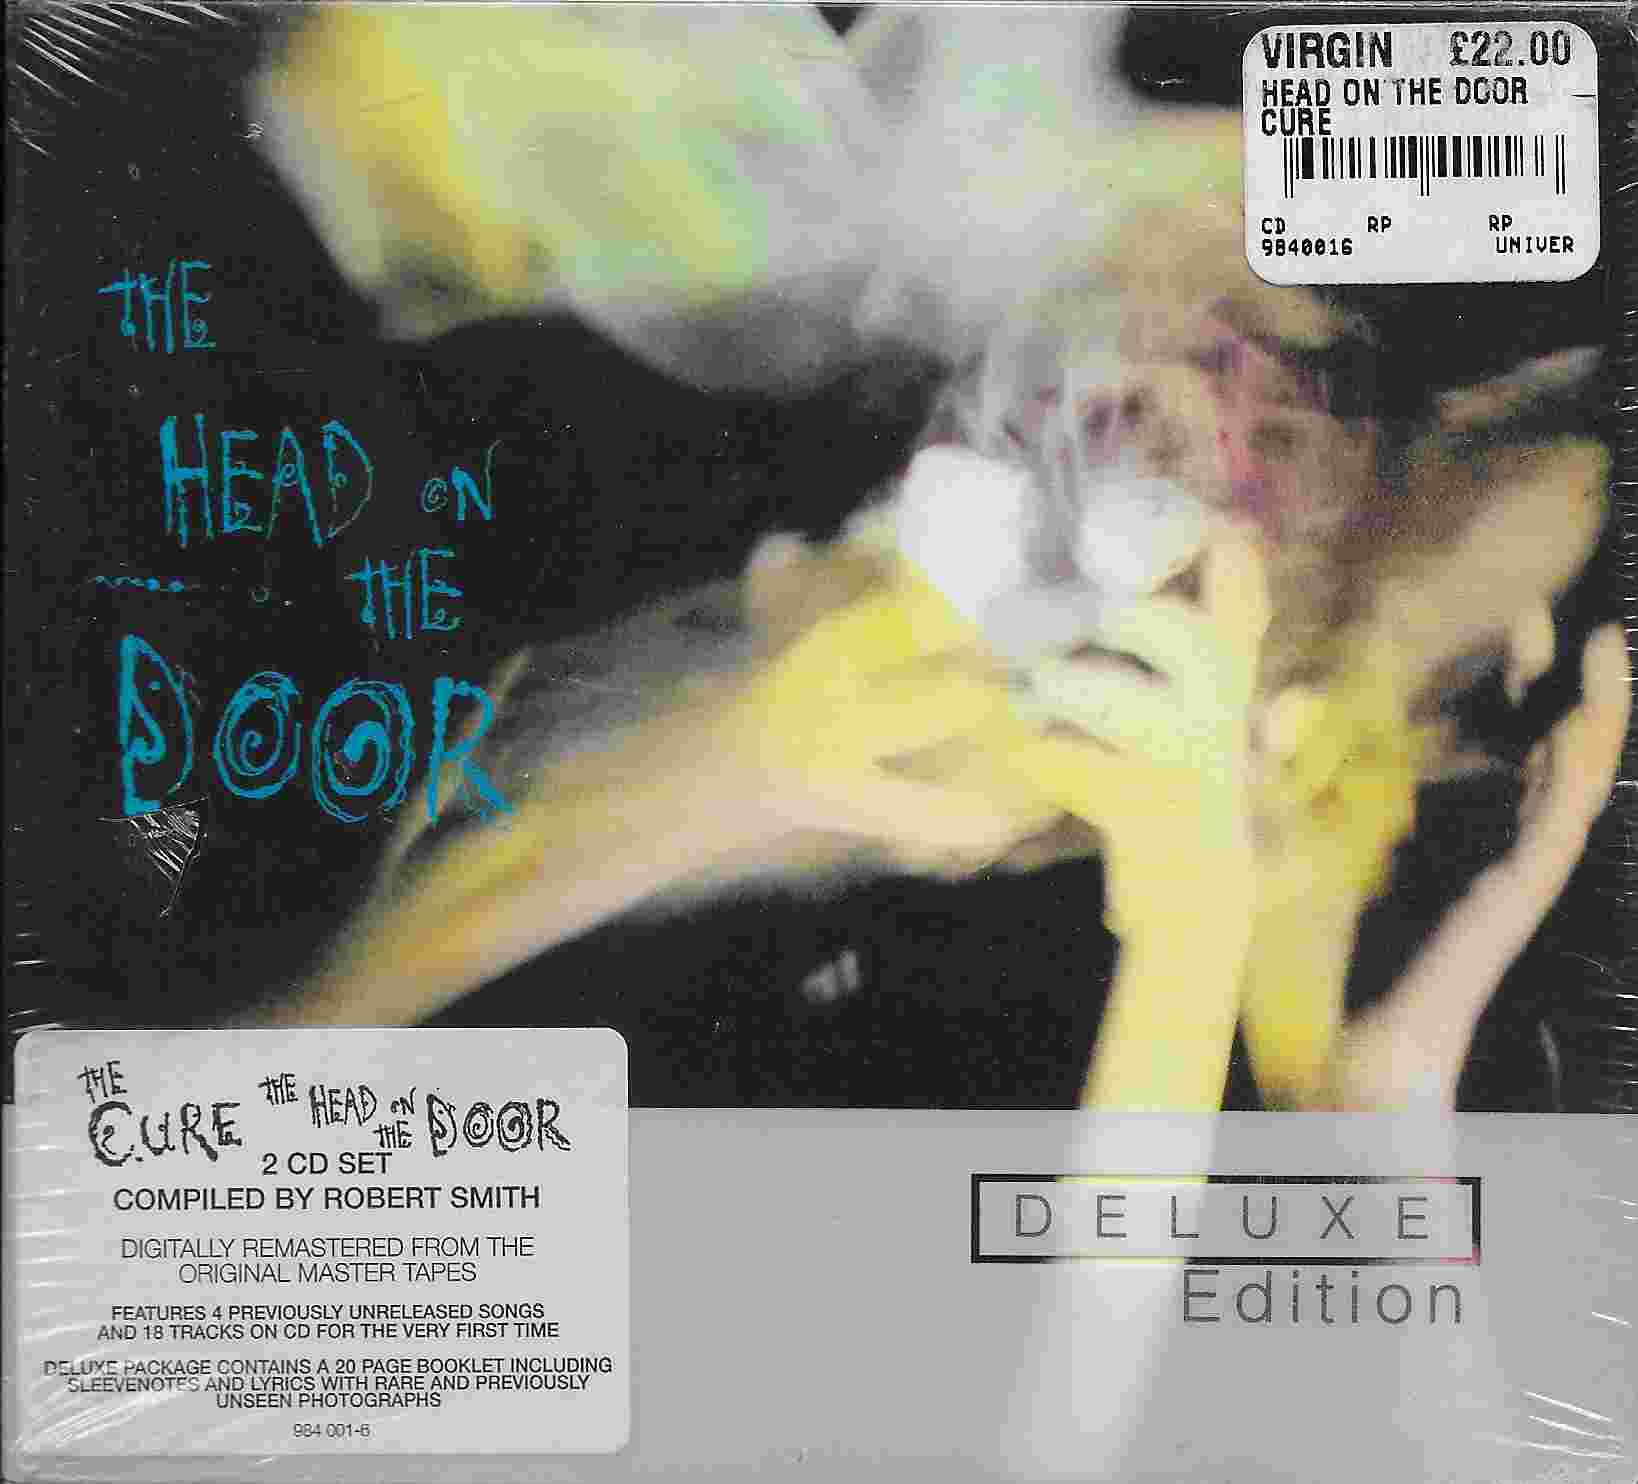 Picture of The head on the door by artist The Cure 